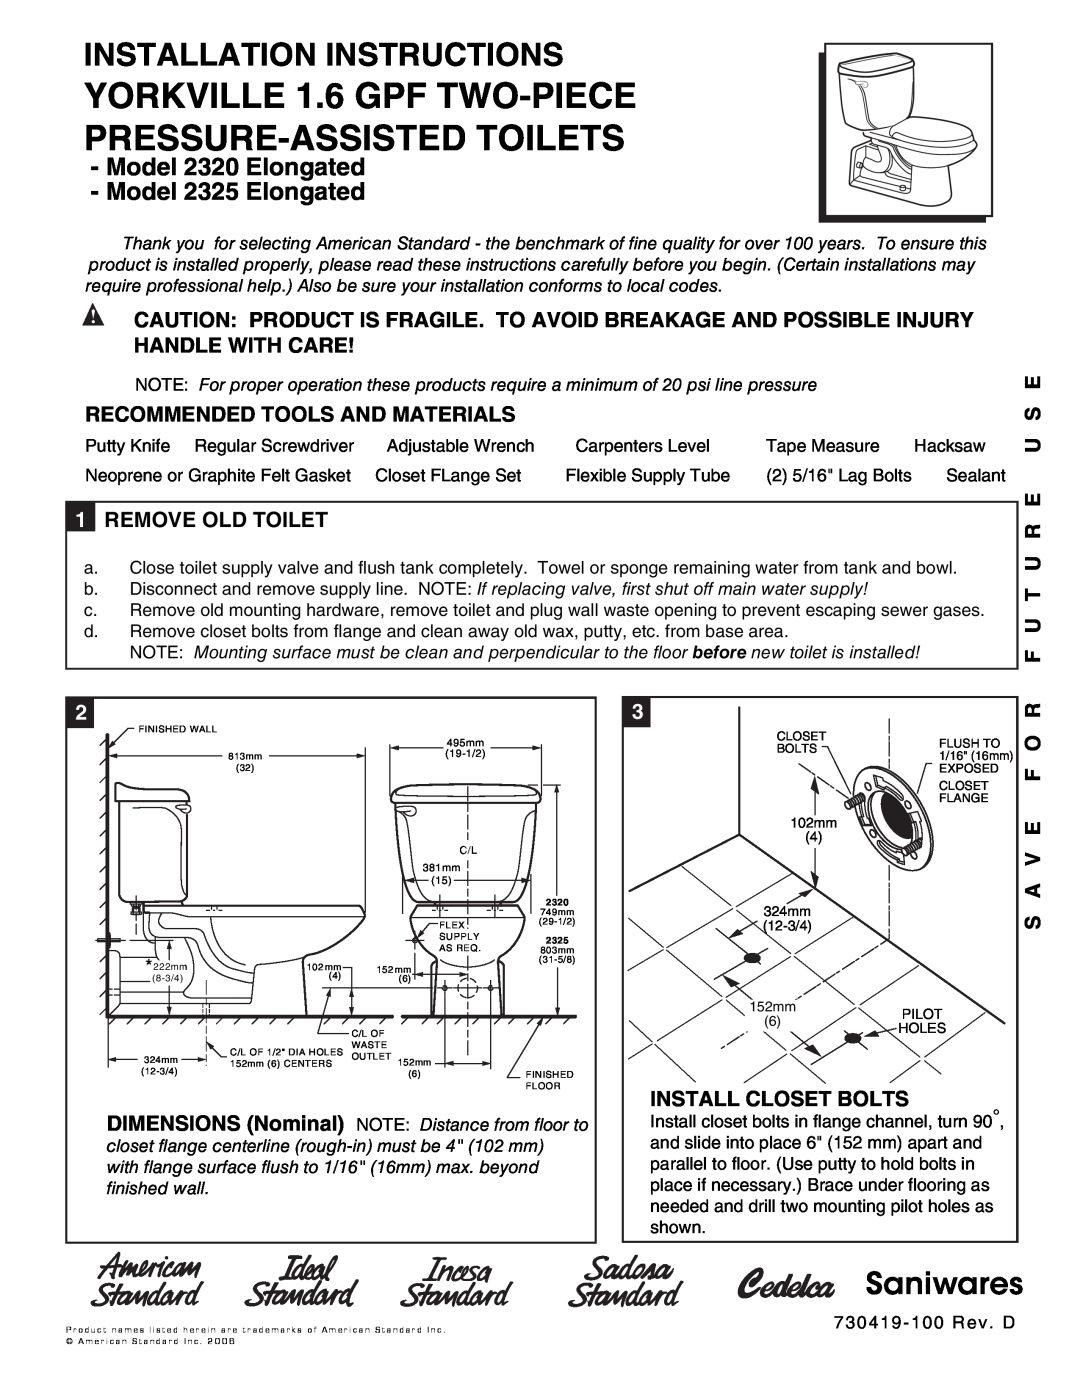 American Standard 2325 Elongated installation instructions Recommended Tools And Materials, 1REMOVE OLD TOILET, Saniwares 